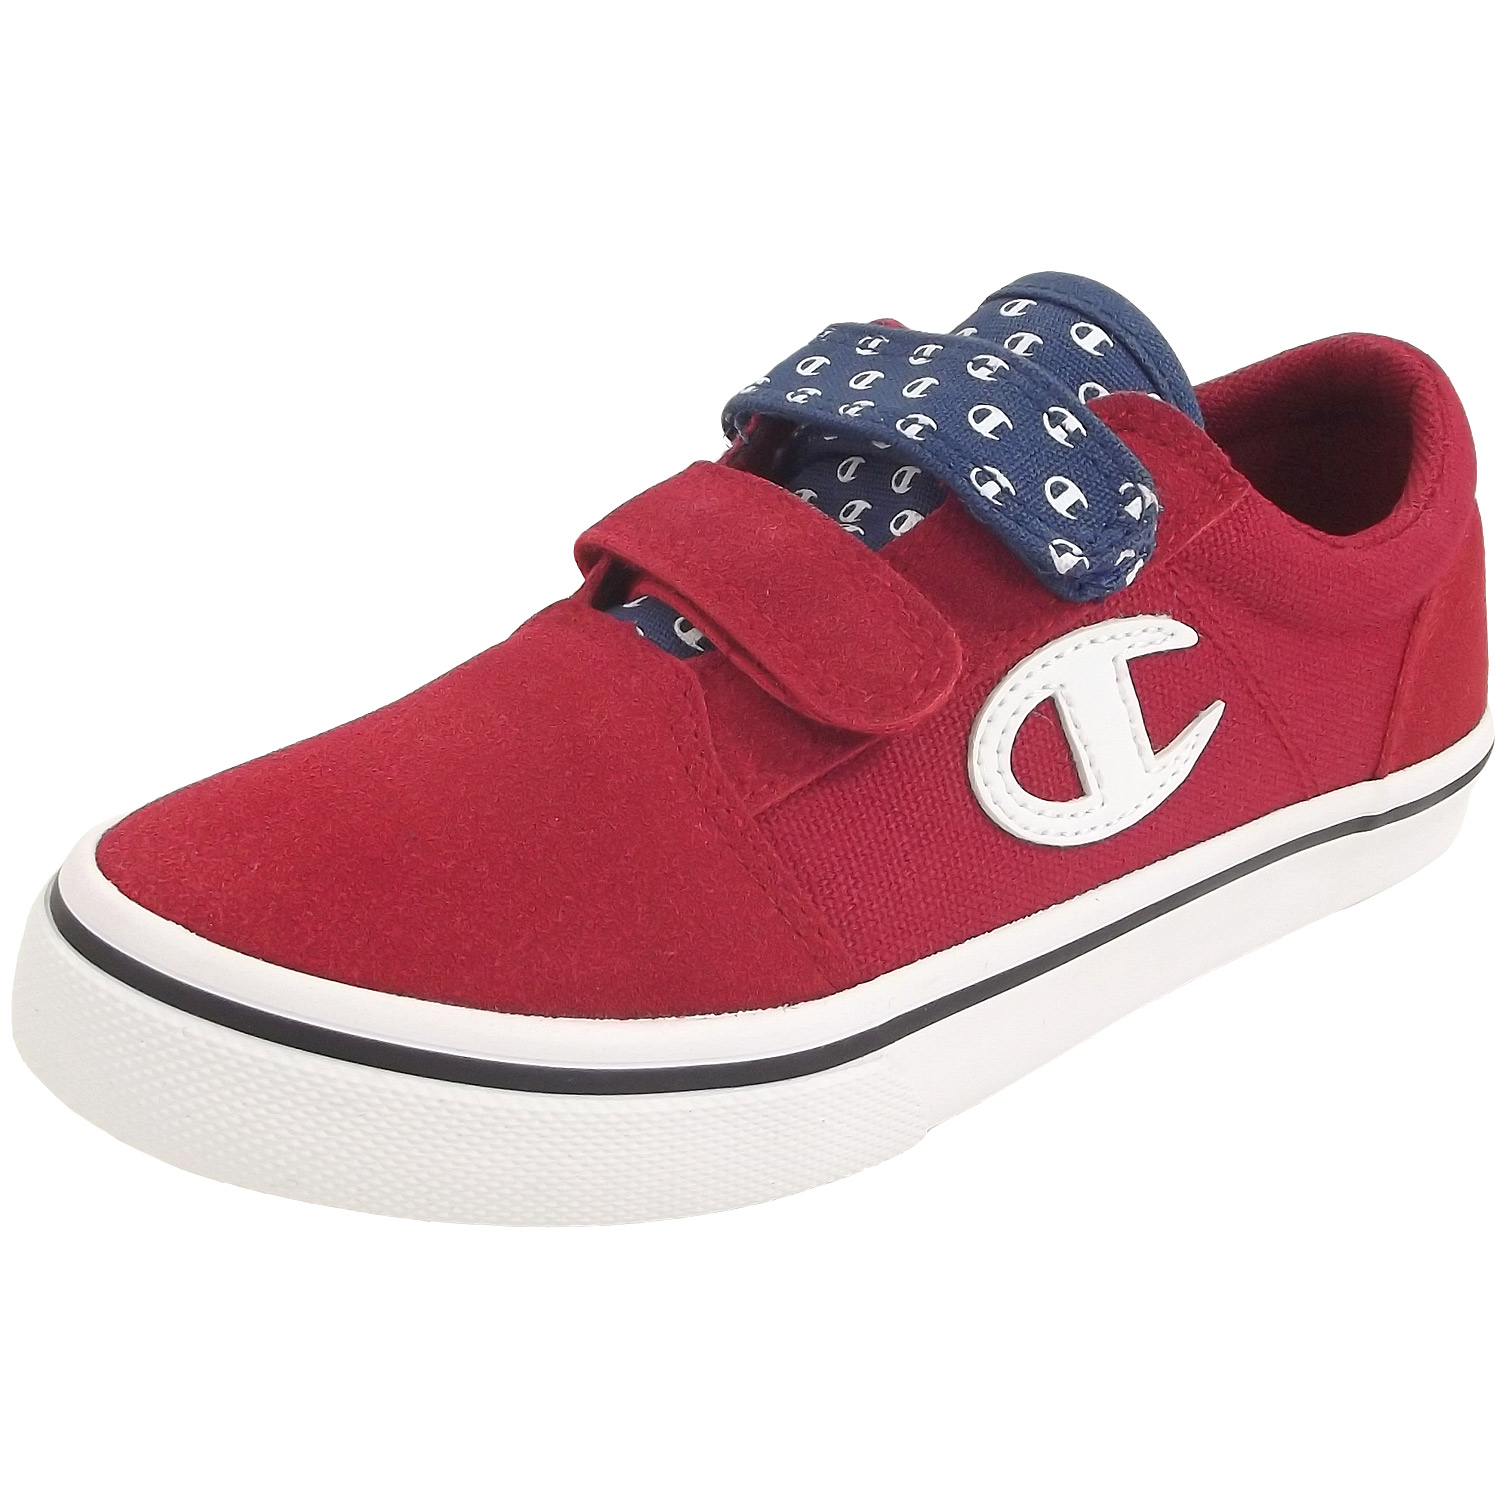 Champion 360 Canvas Child Sneakers red 